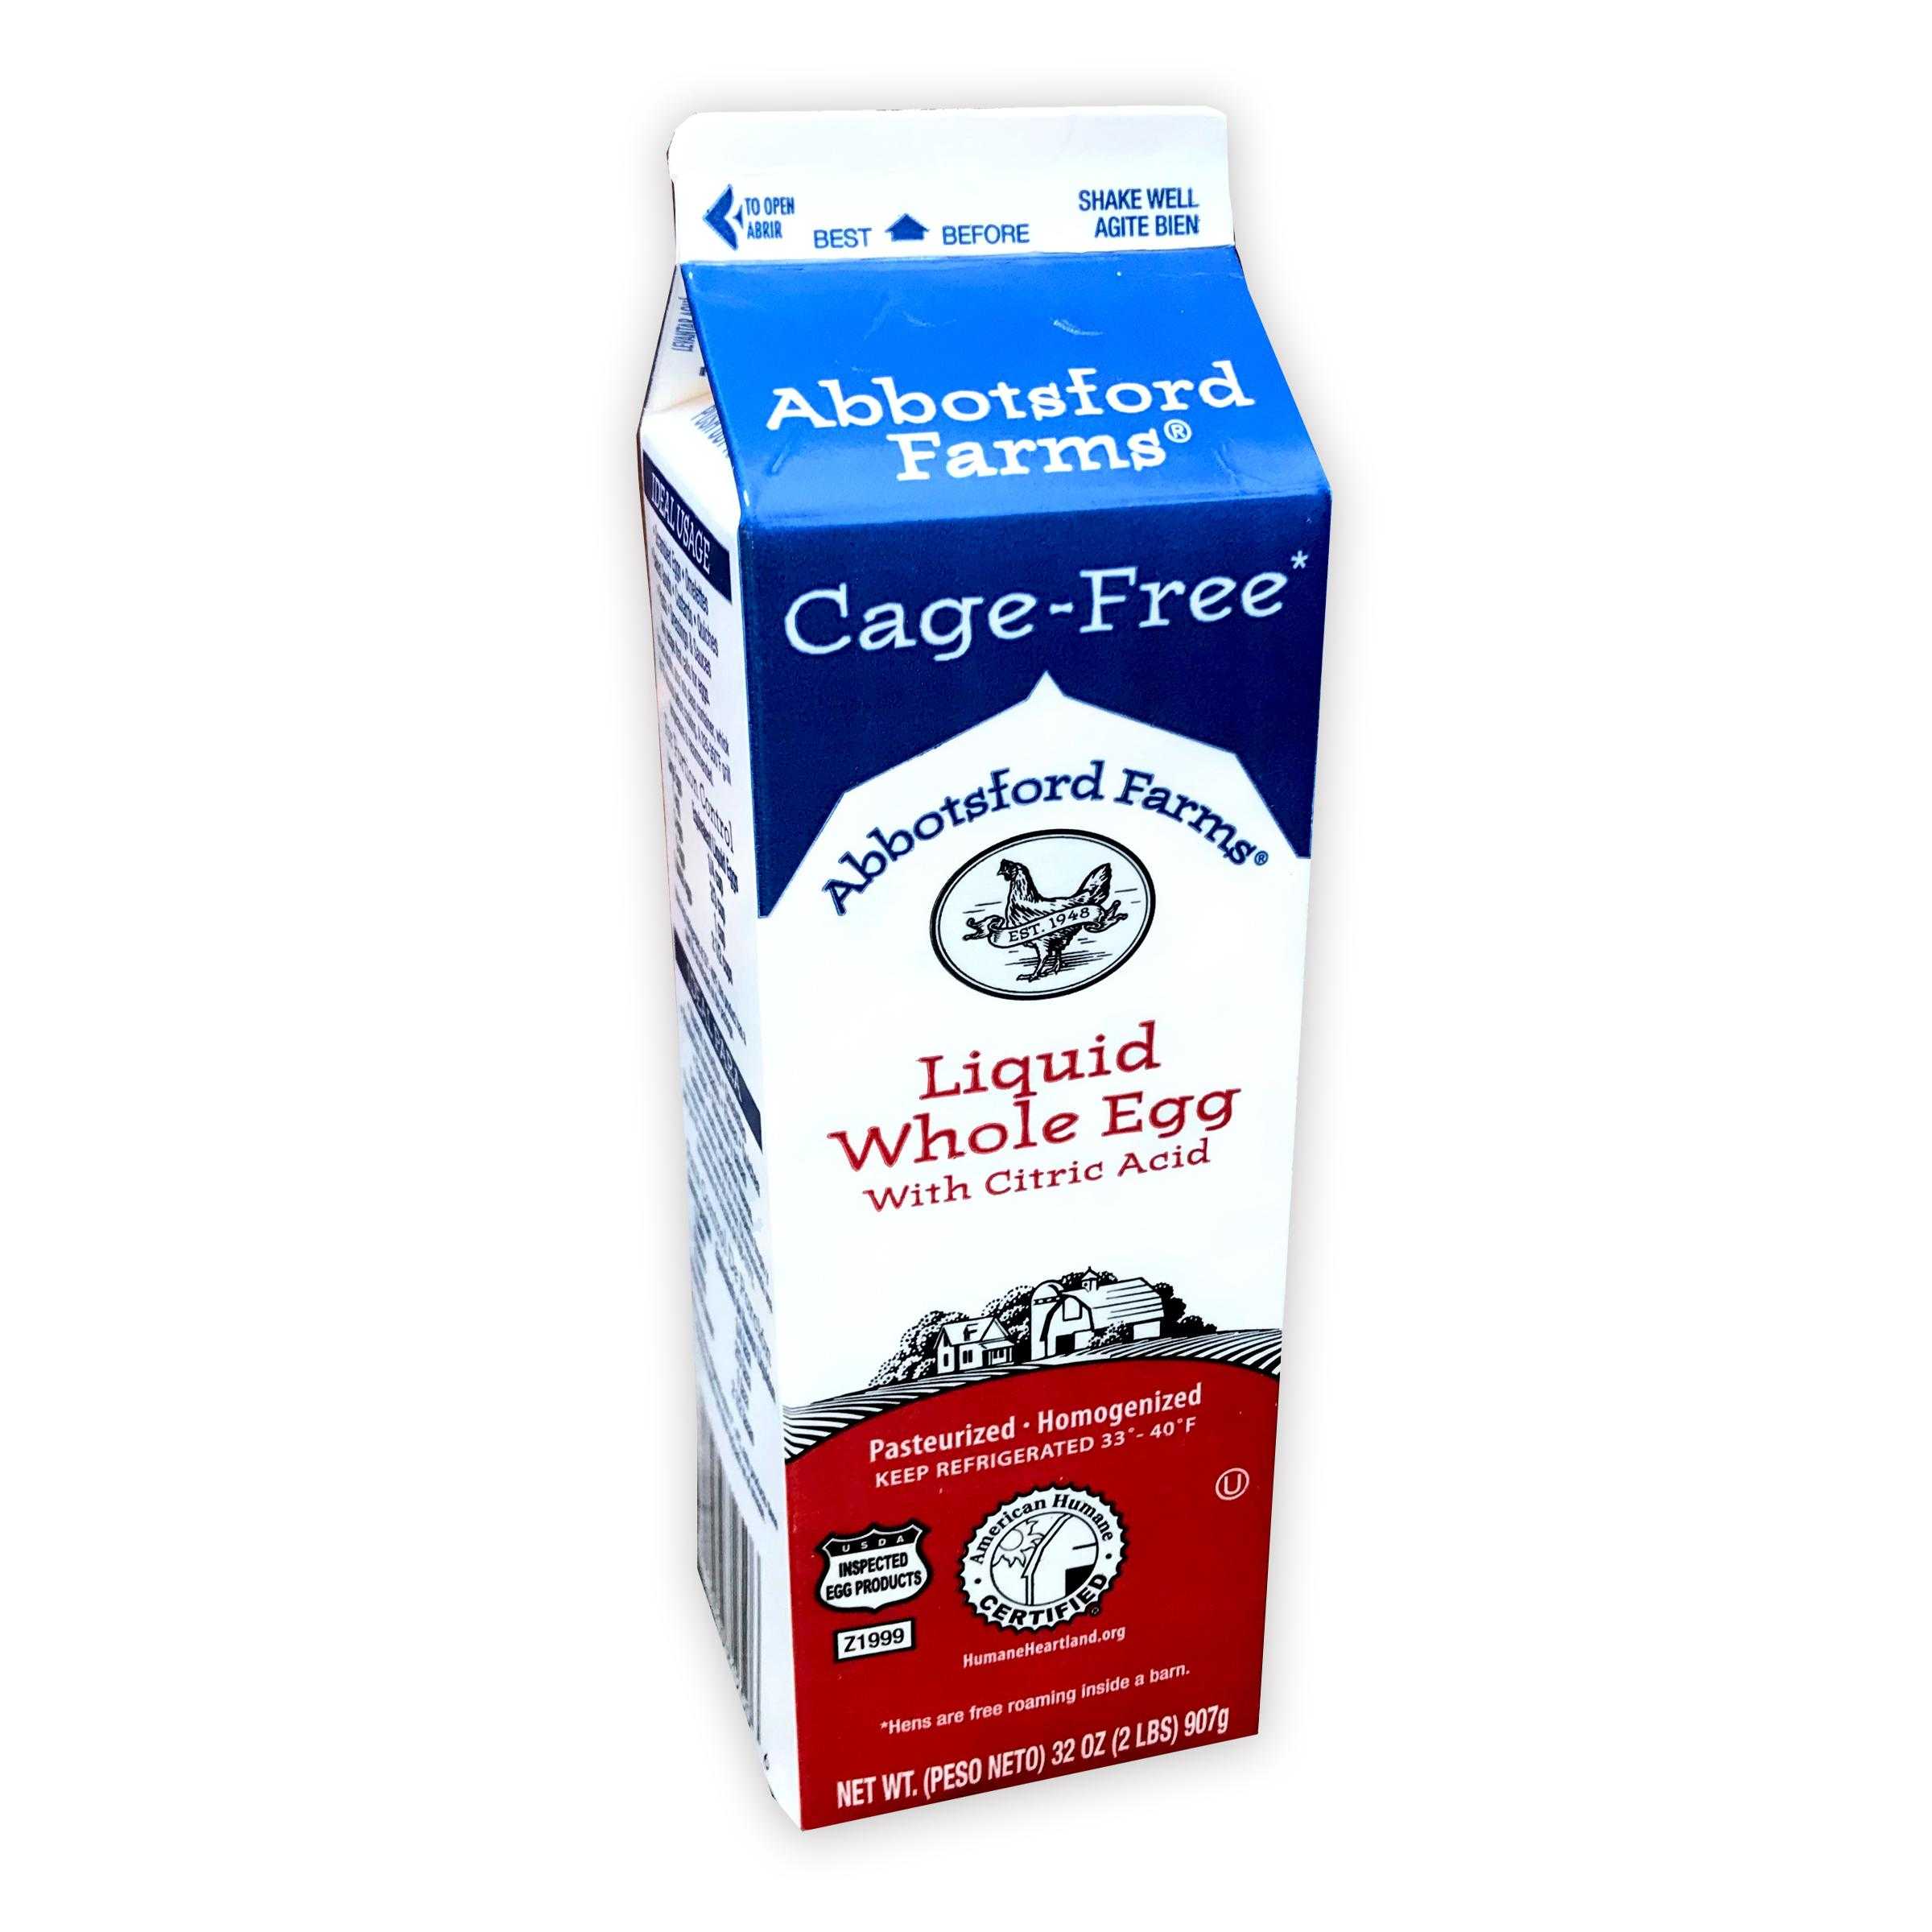 Abbotsford Farms® American Humane Certified Cage Free Refrigerated Liquid Whole Egg with Citric Acid, 15/2 Lb Cartons